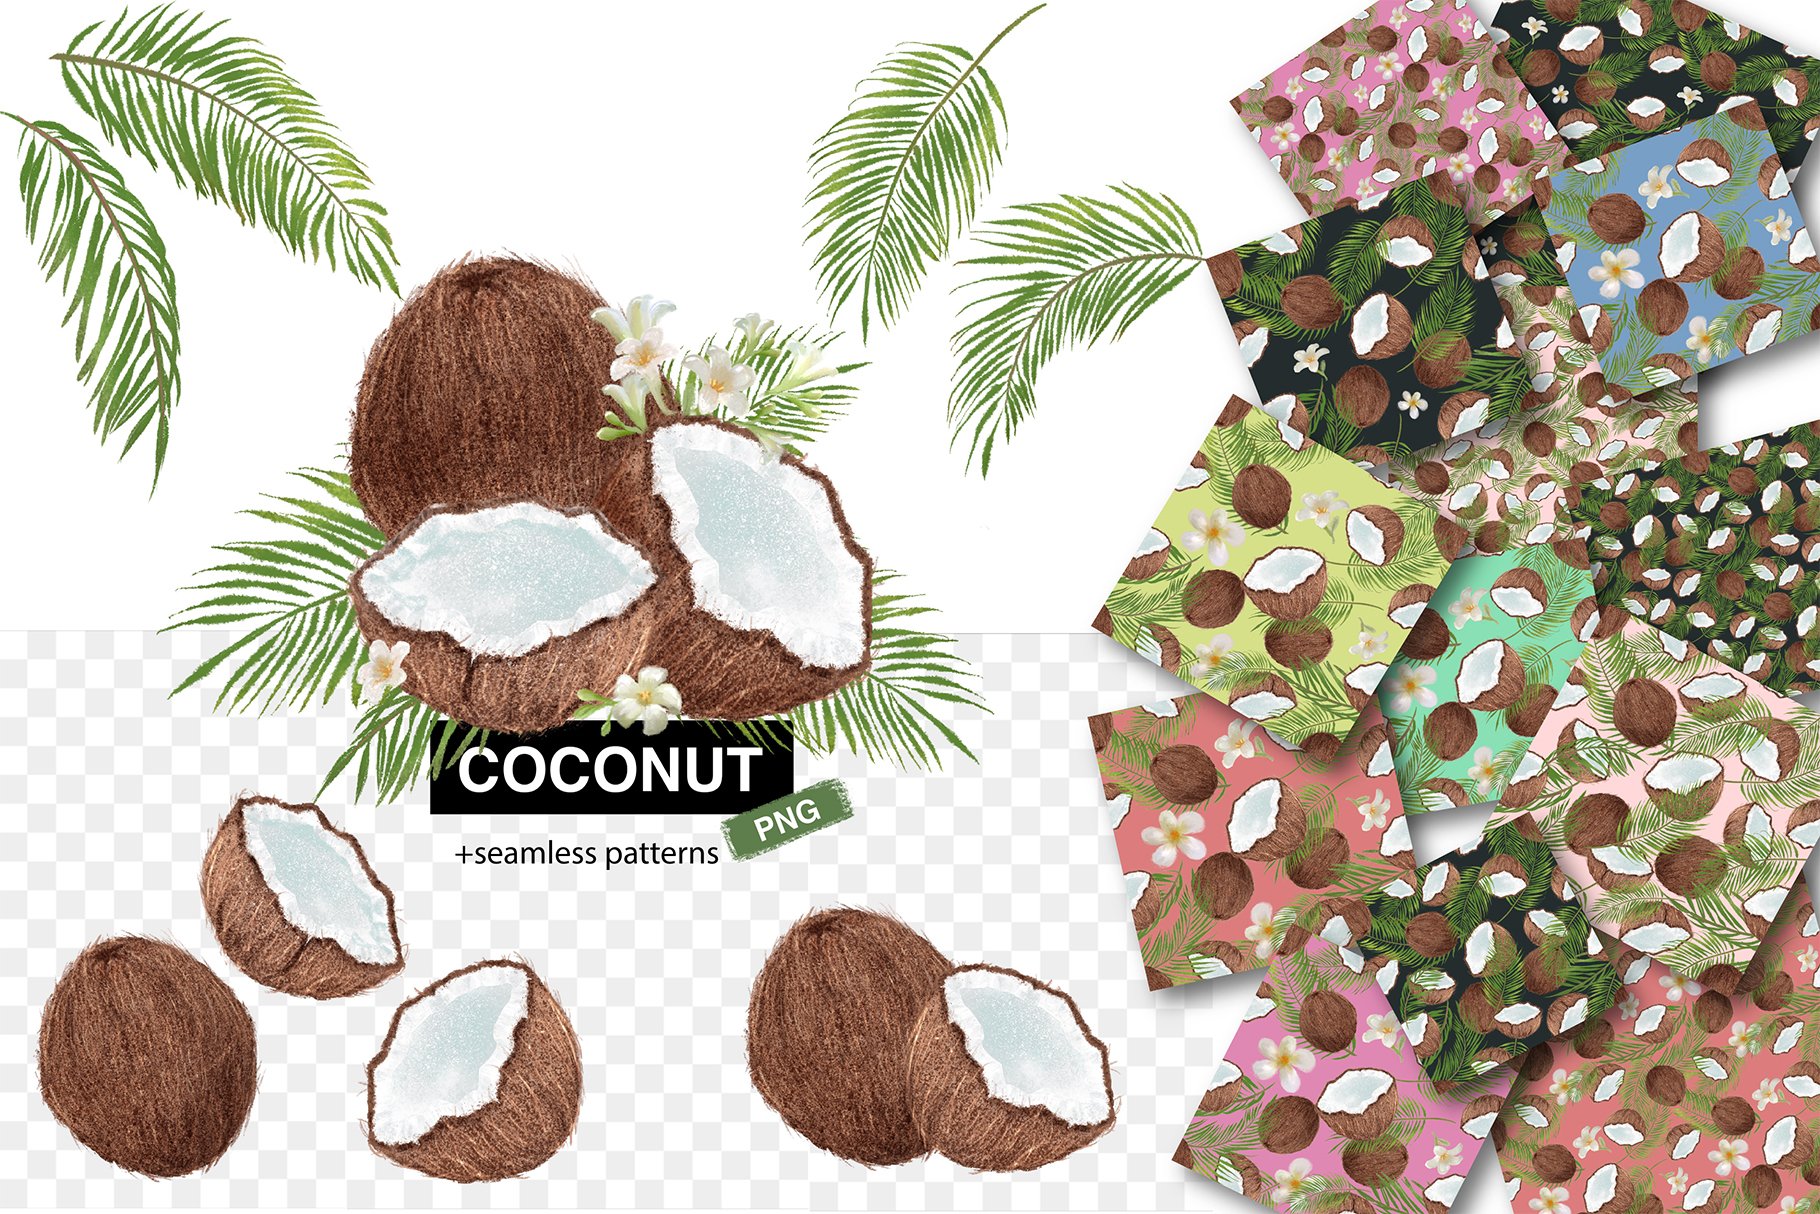 Tropical coconut set cover image.